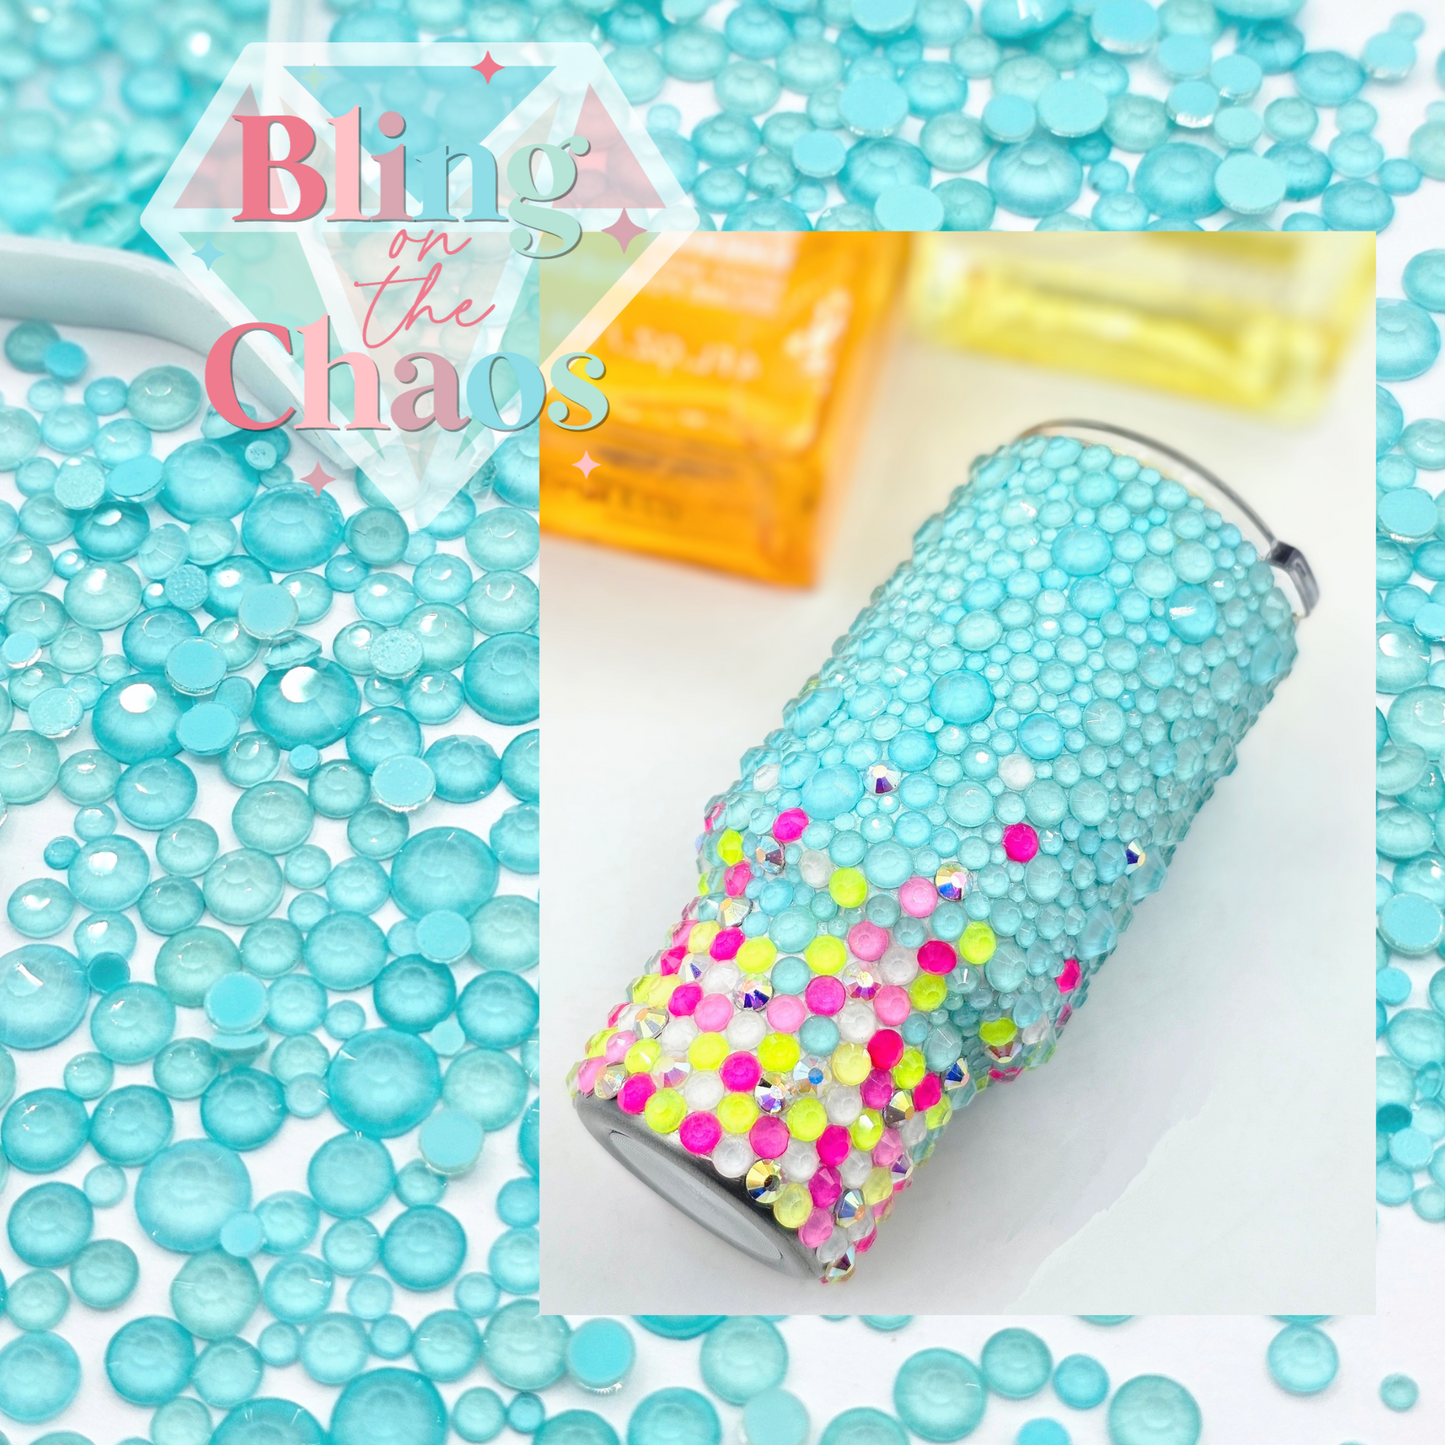 Glow Light Aqua/Frosted Breakfast Blue Specialty Glass Mix-Glass Rhinestones-Bling on the Chaos